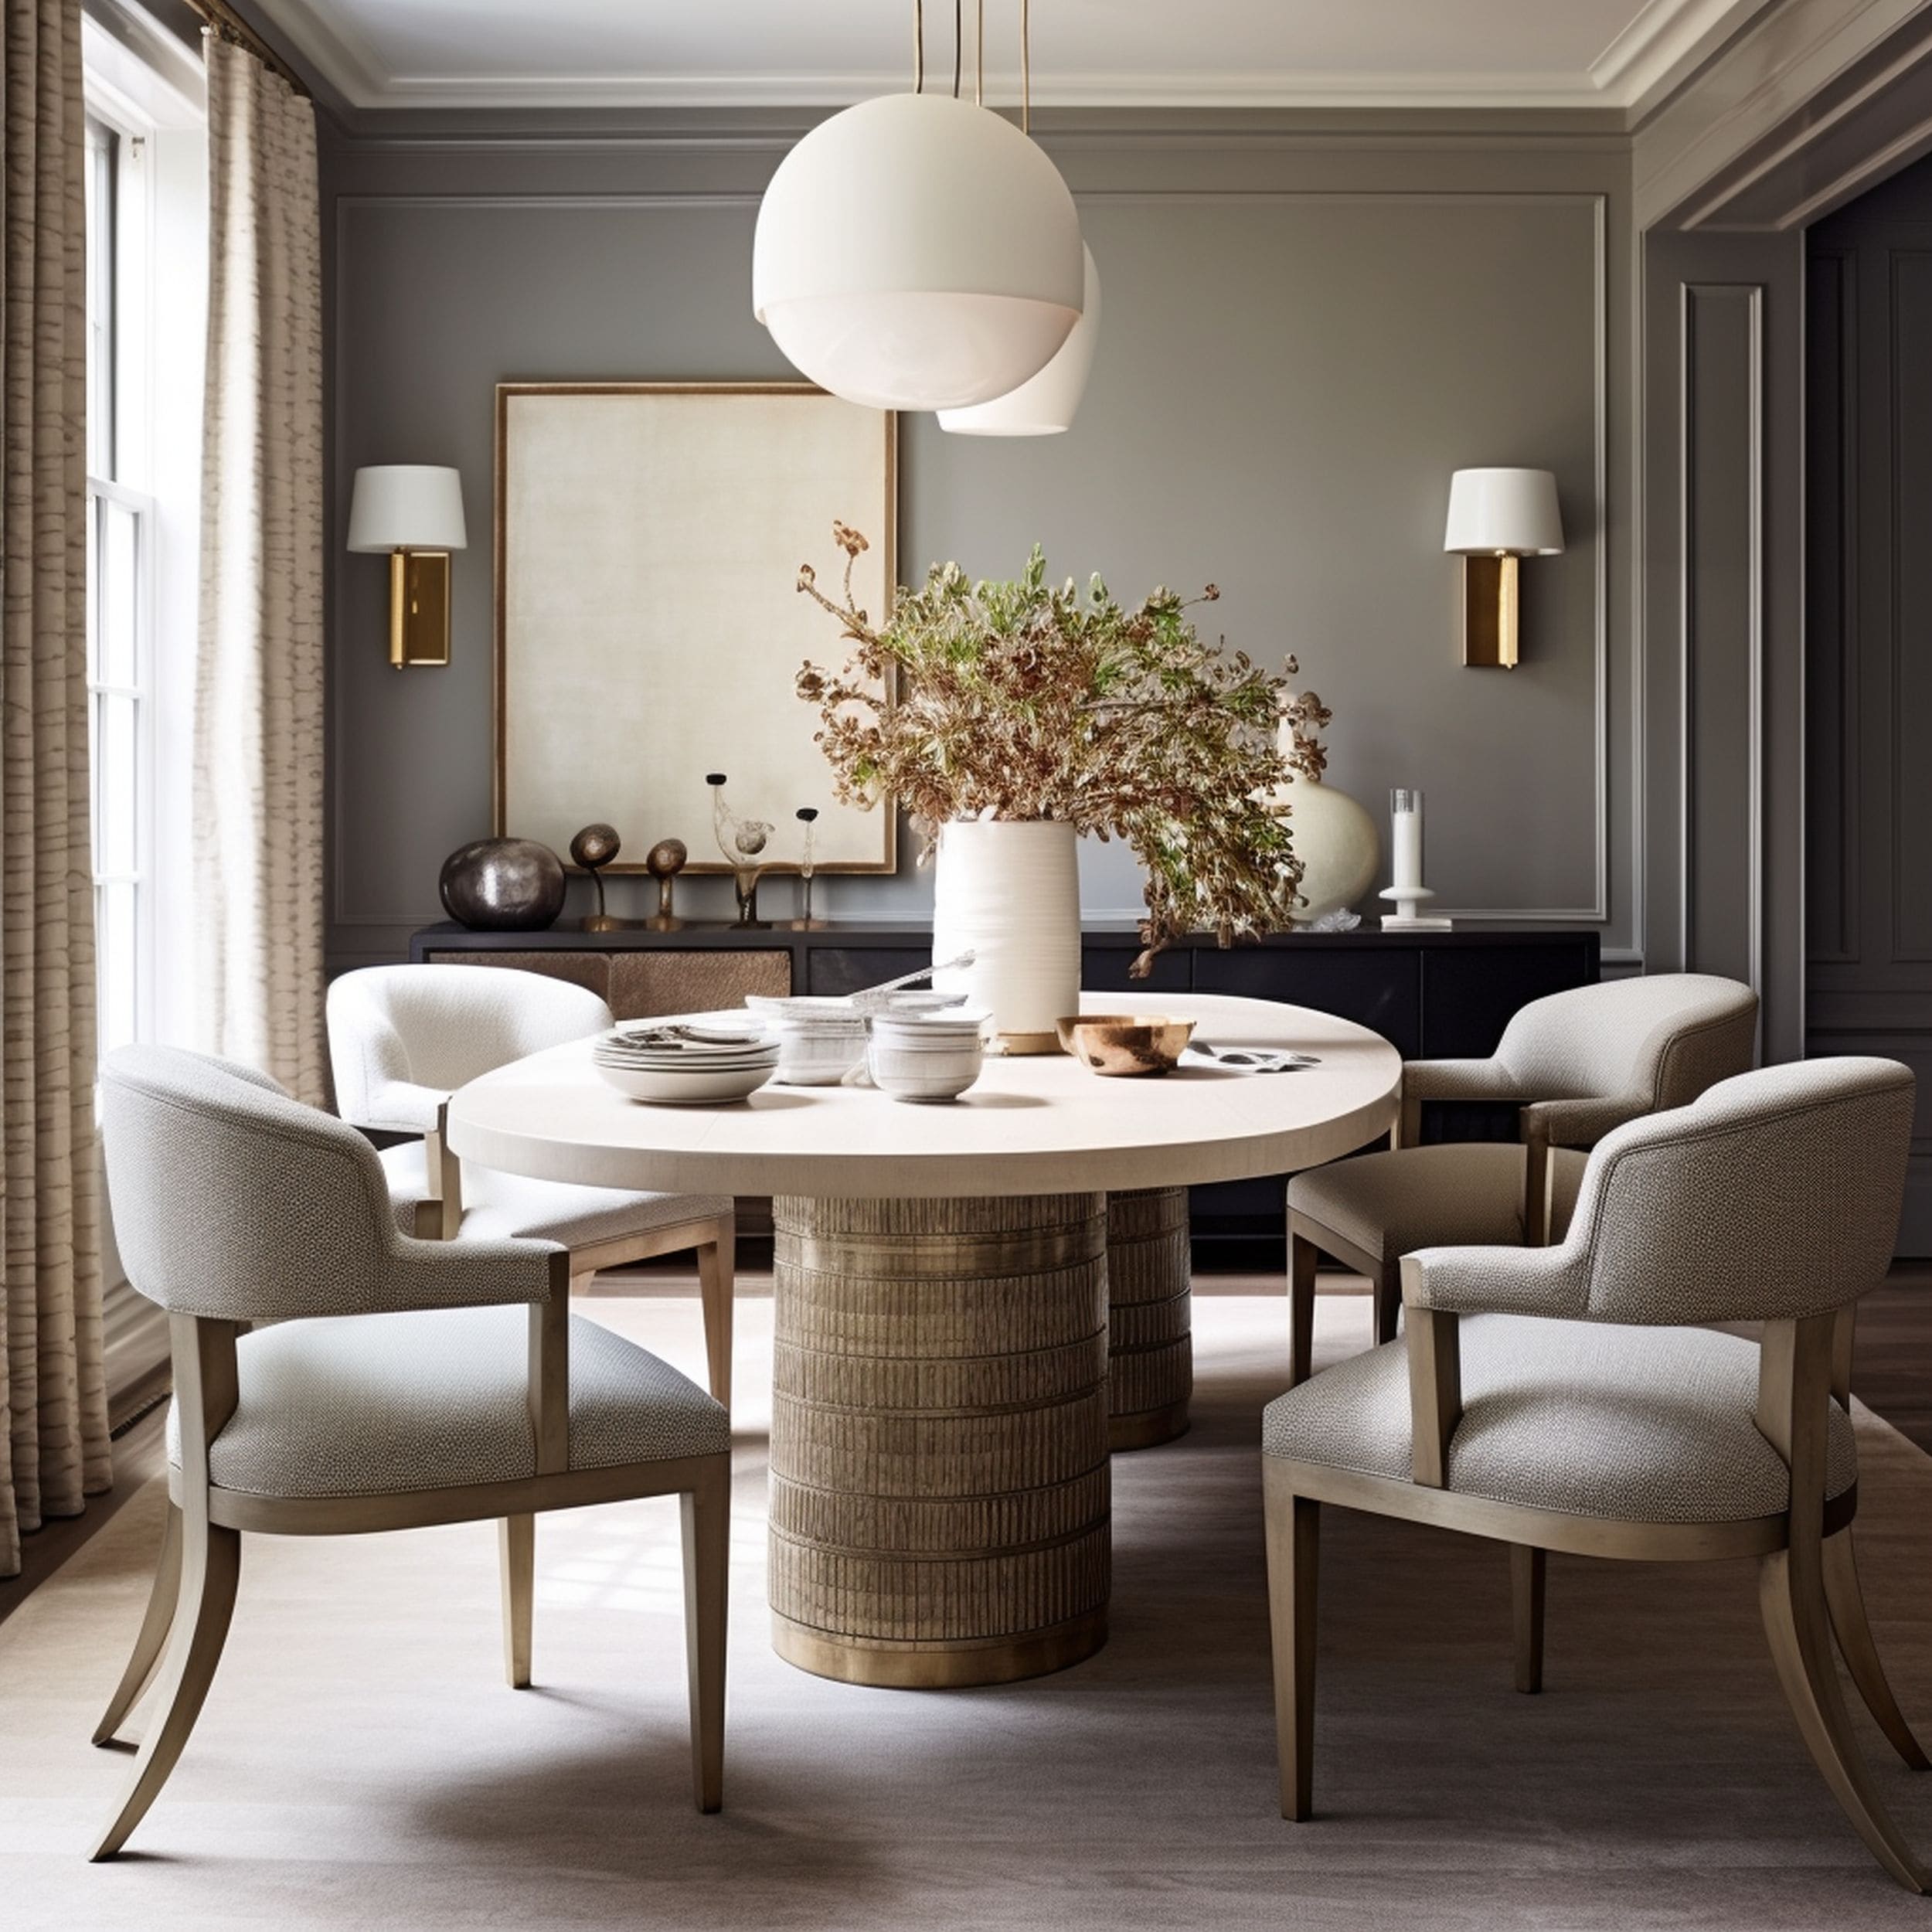 Neutral Toned Dining Room With Brass Accents